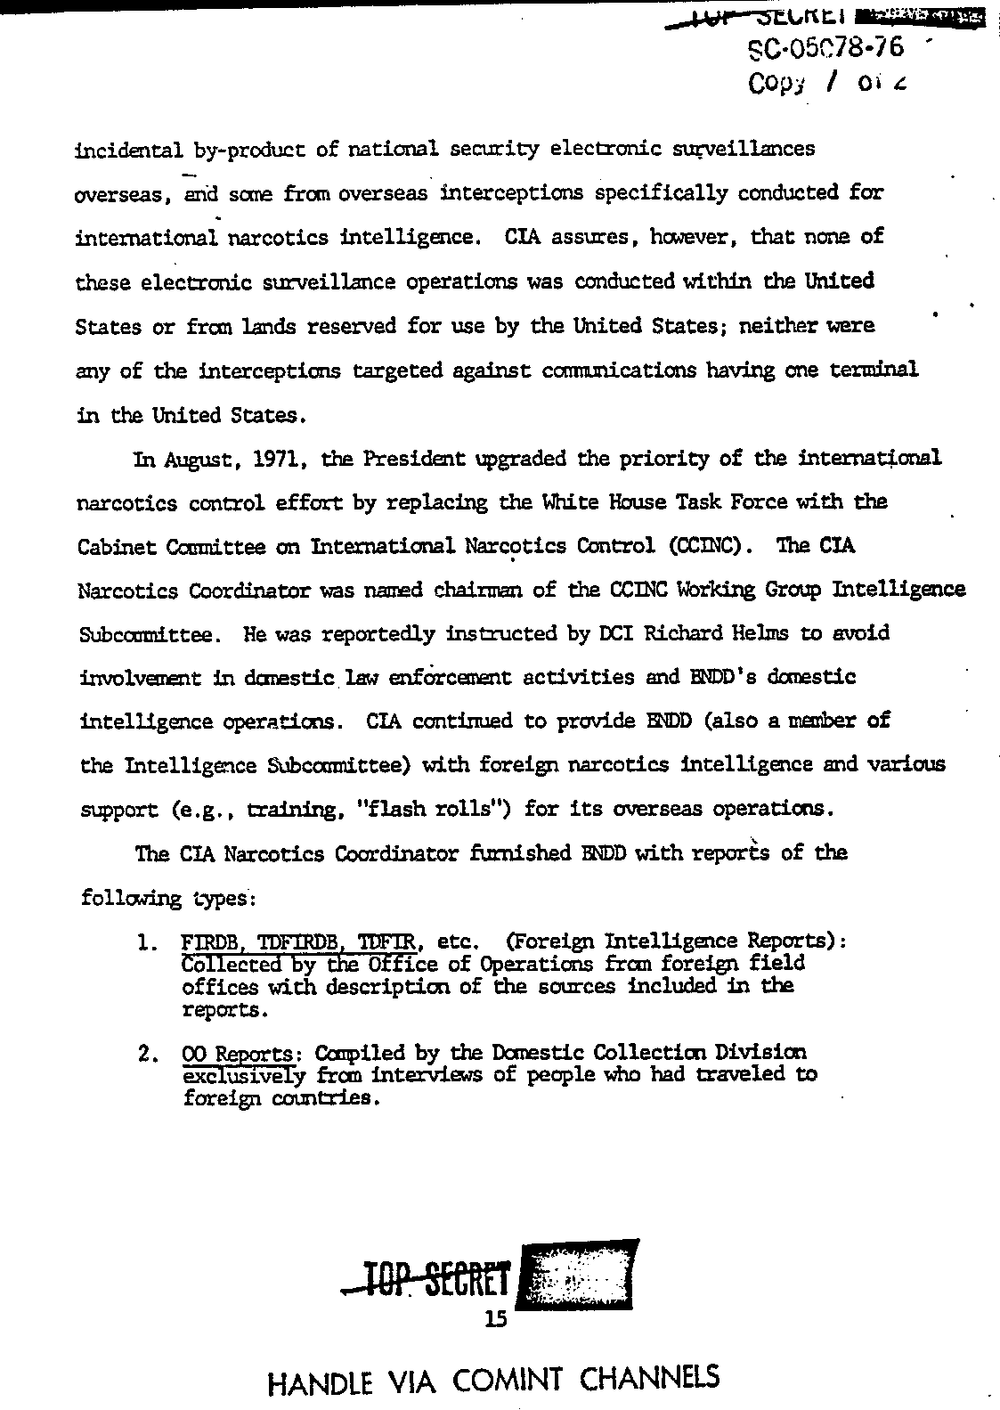 Page 23 from Report on Inquiry Into CIA Related Electronic Surveillance Activities